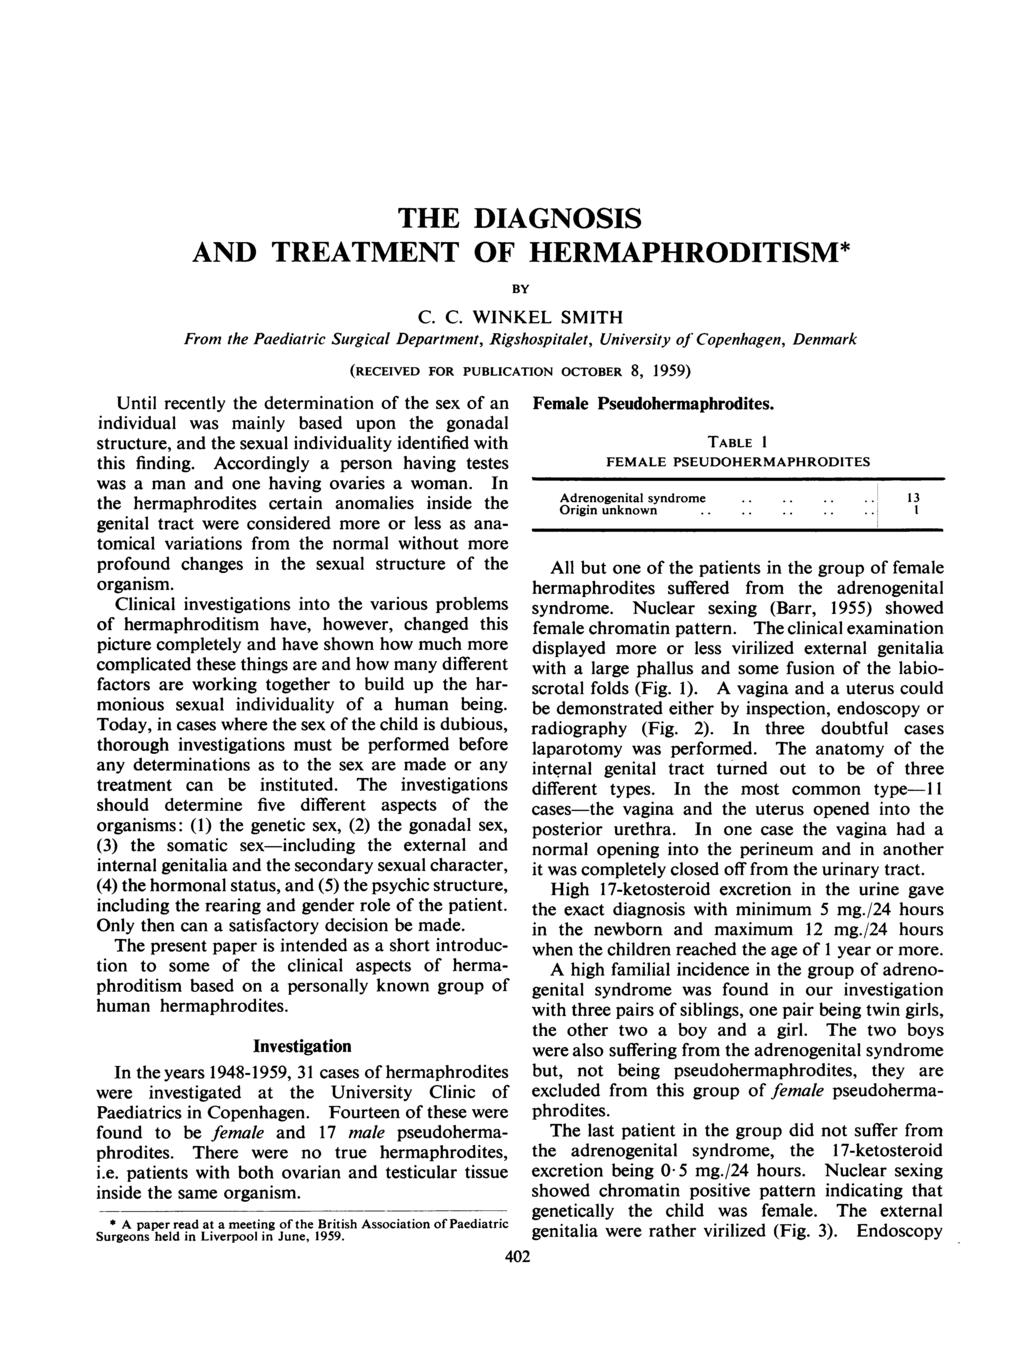 THE DIAGNOSIS AND TREATMENT OF HERMAPHRODITISM* BY C.